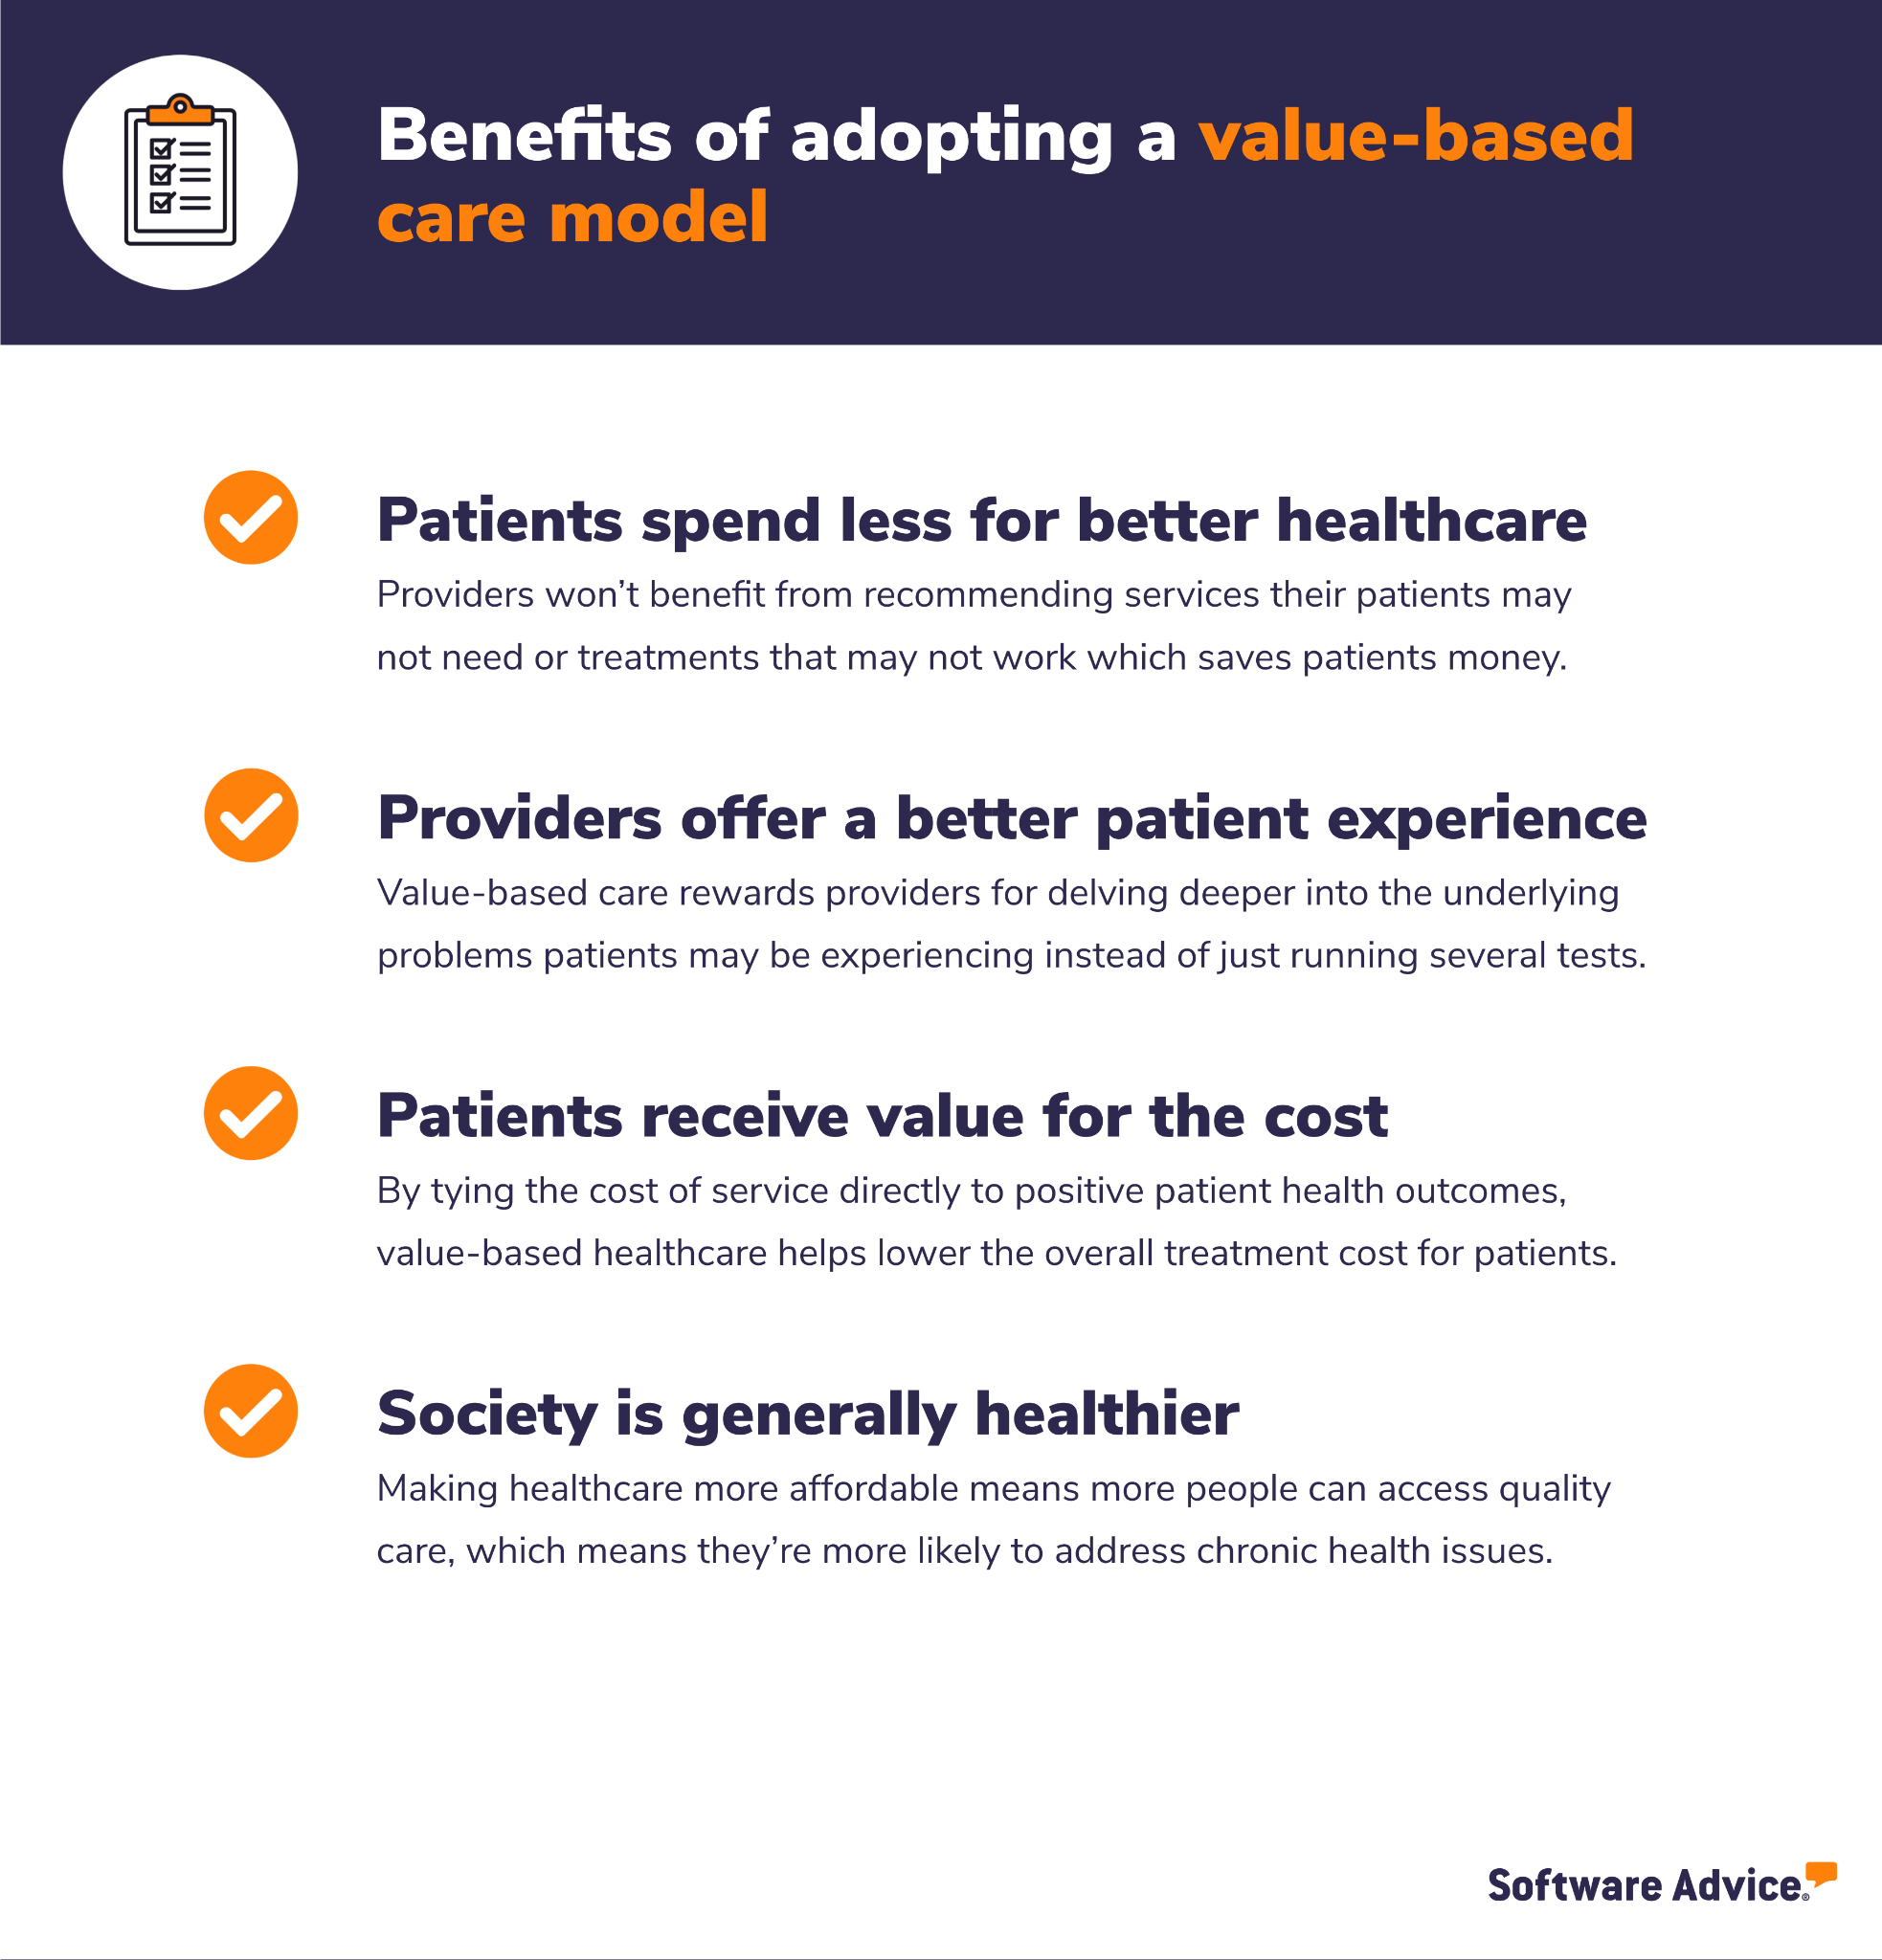 Benefits-of-adopting-a-value-based-care-model-checklist